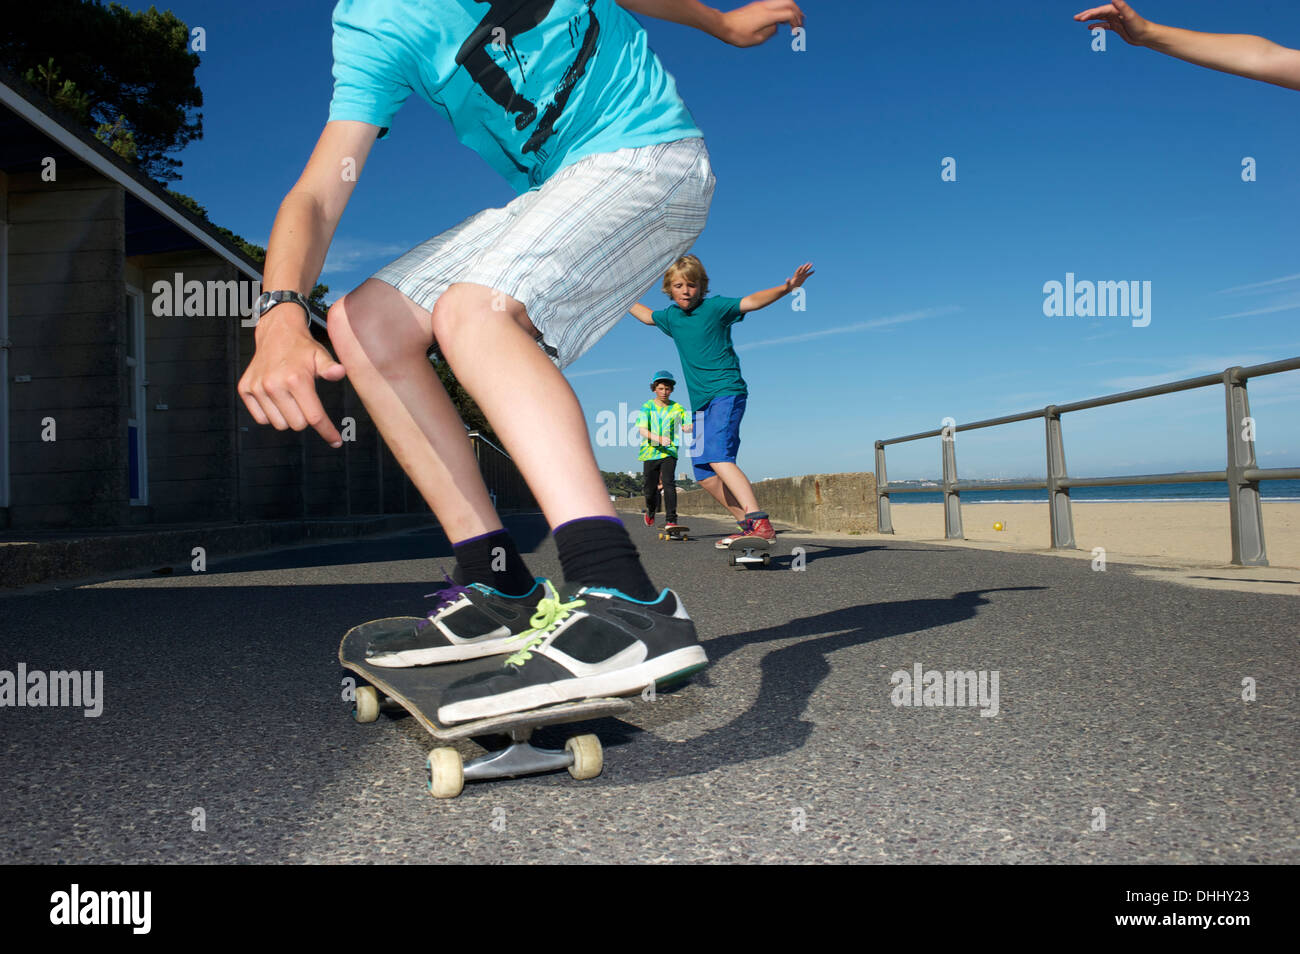 Skateboarding High Resolution Stock Photography and Images - Alamy